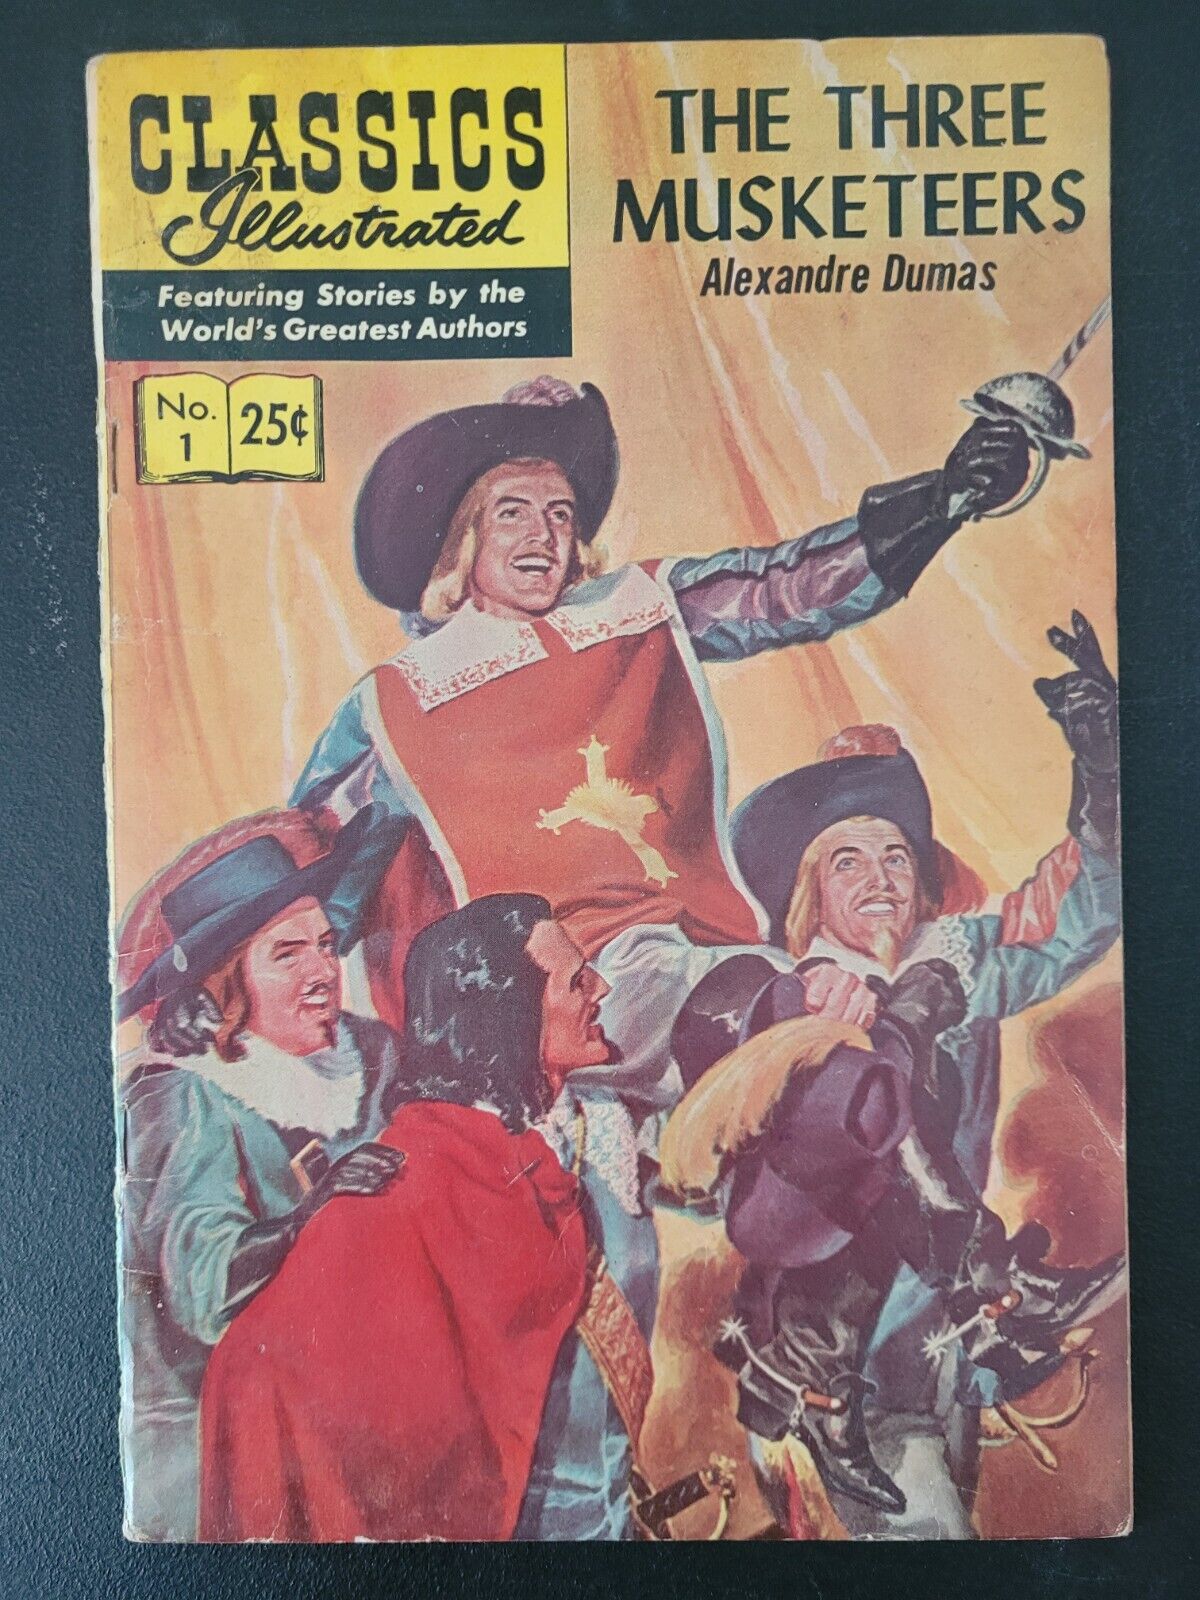 CLASSICS ILLUSTRATED #1 THE THREE MUSKETEERS (1971) ALEXANDRE DUMAS CLASSIC